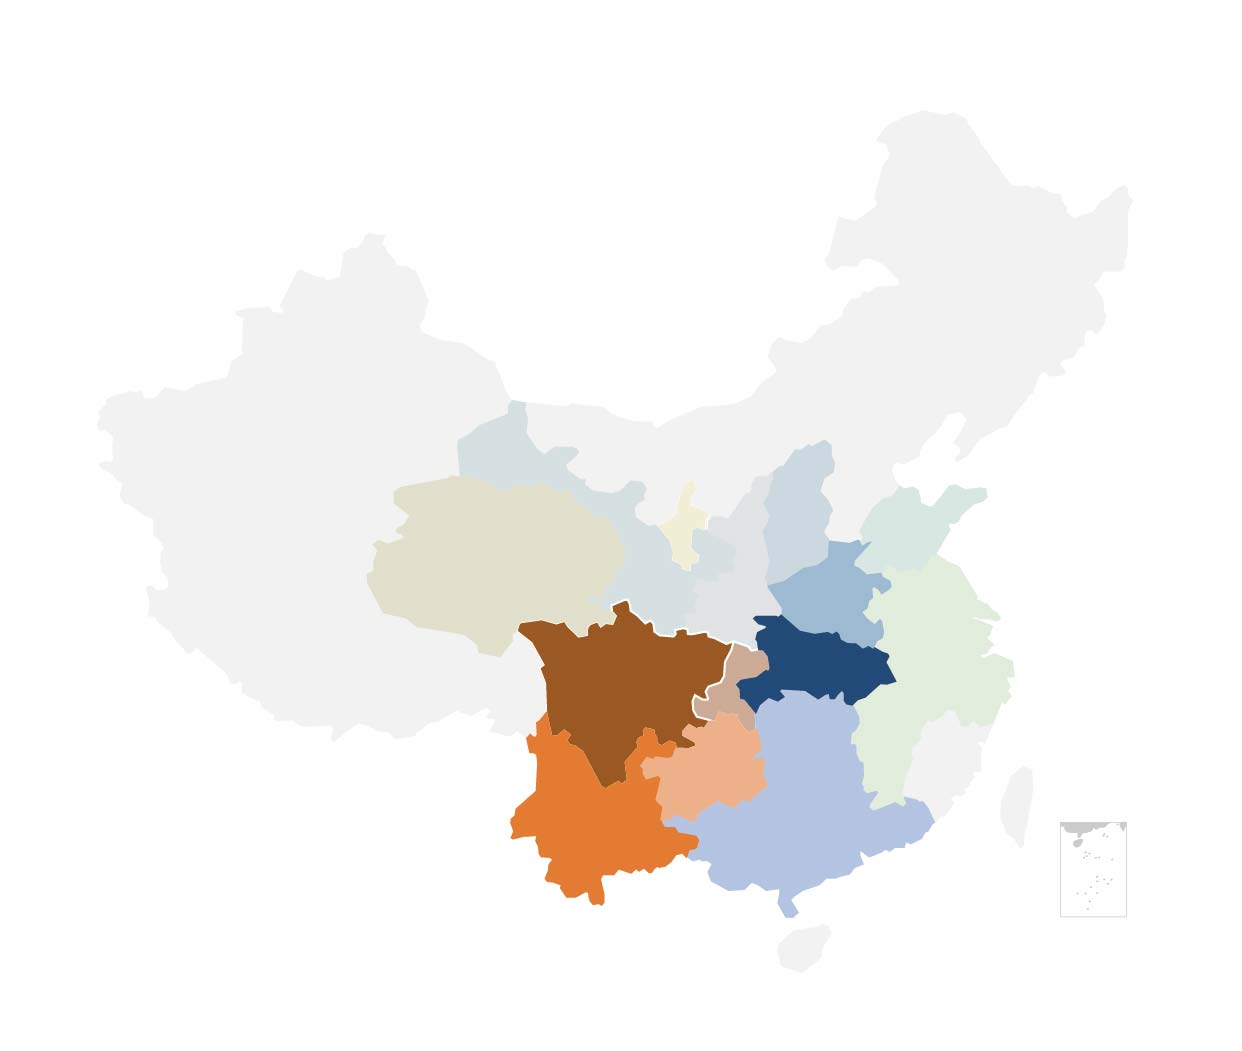 China lithium iron phosphate cathode material productivity distribution map